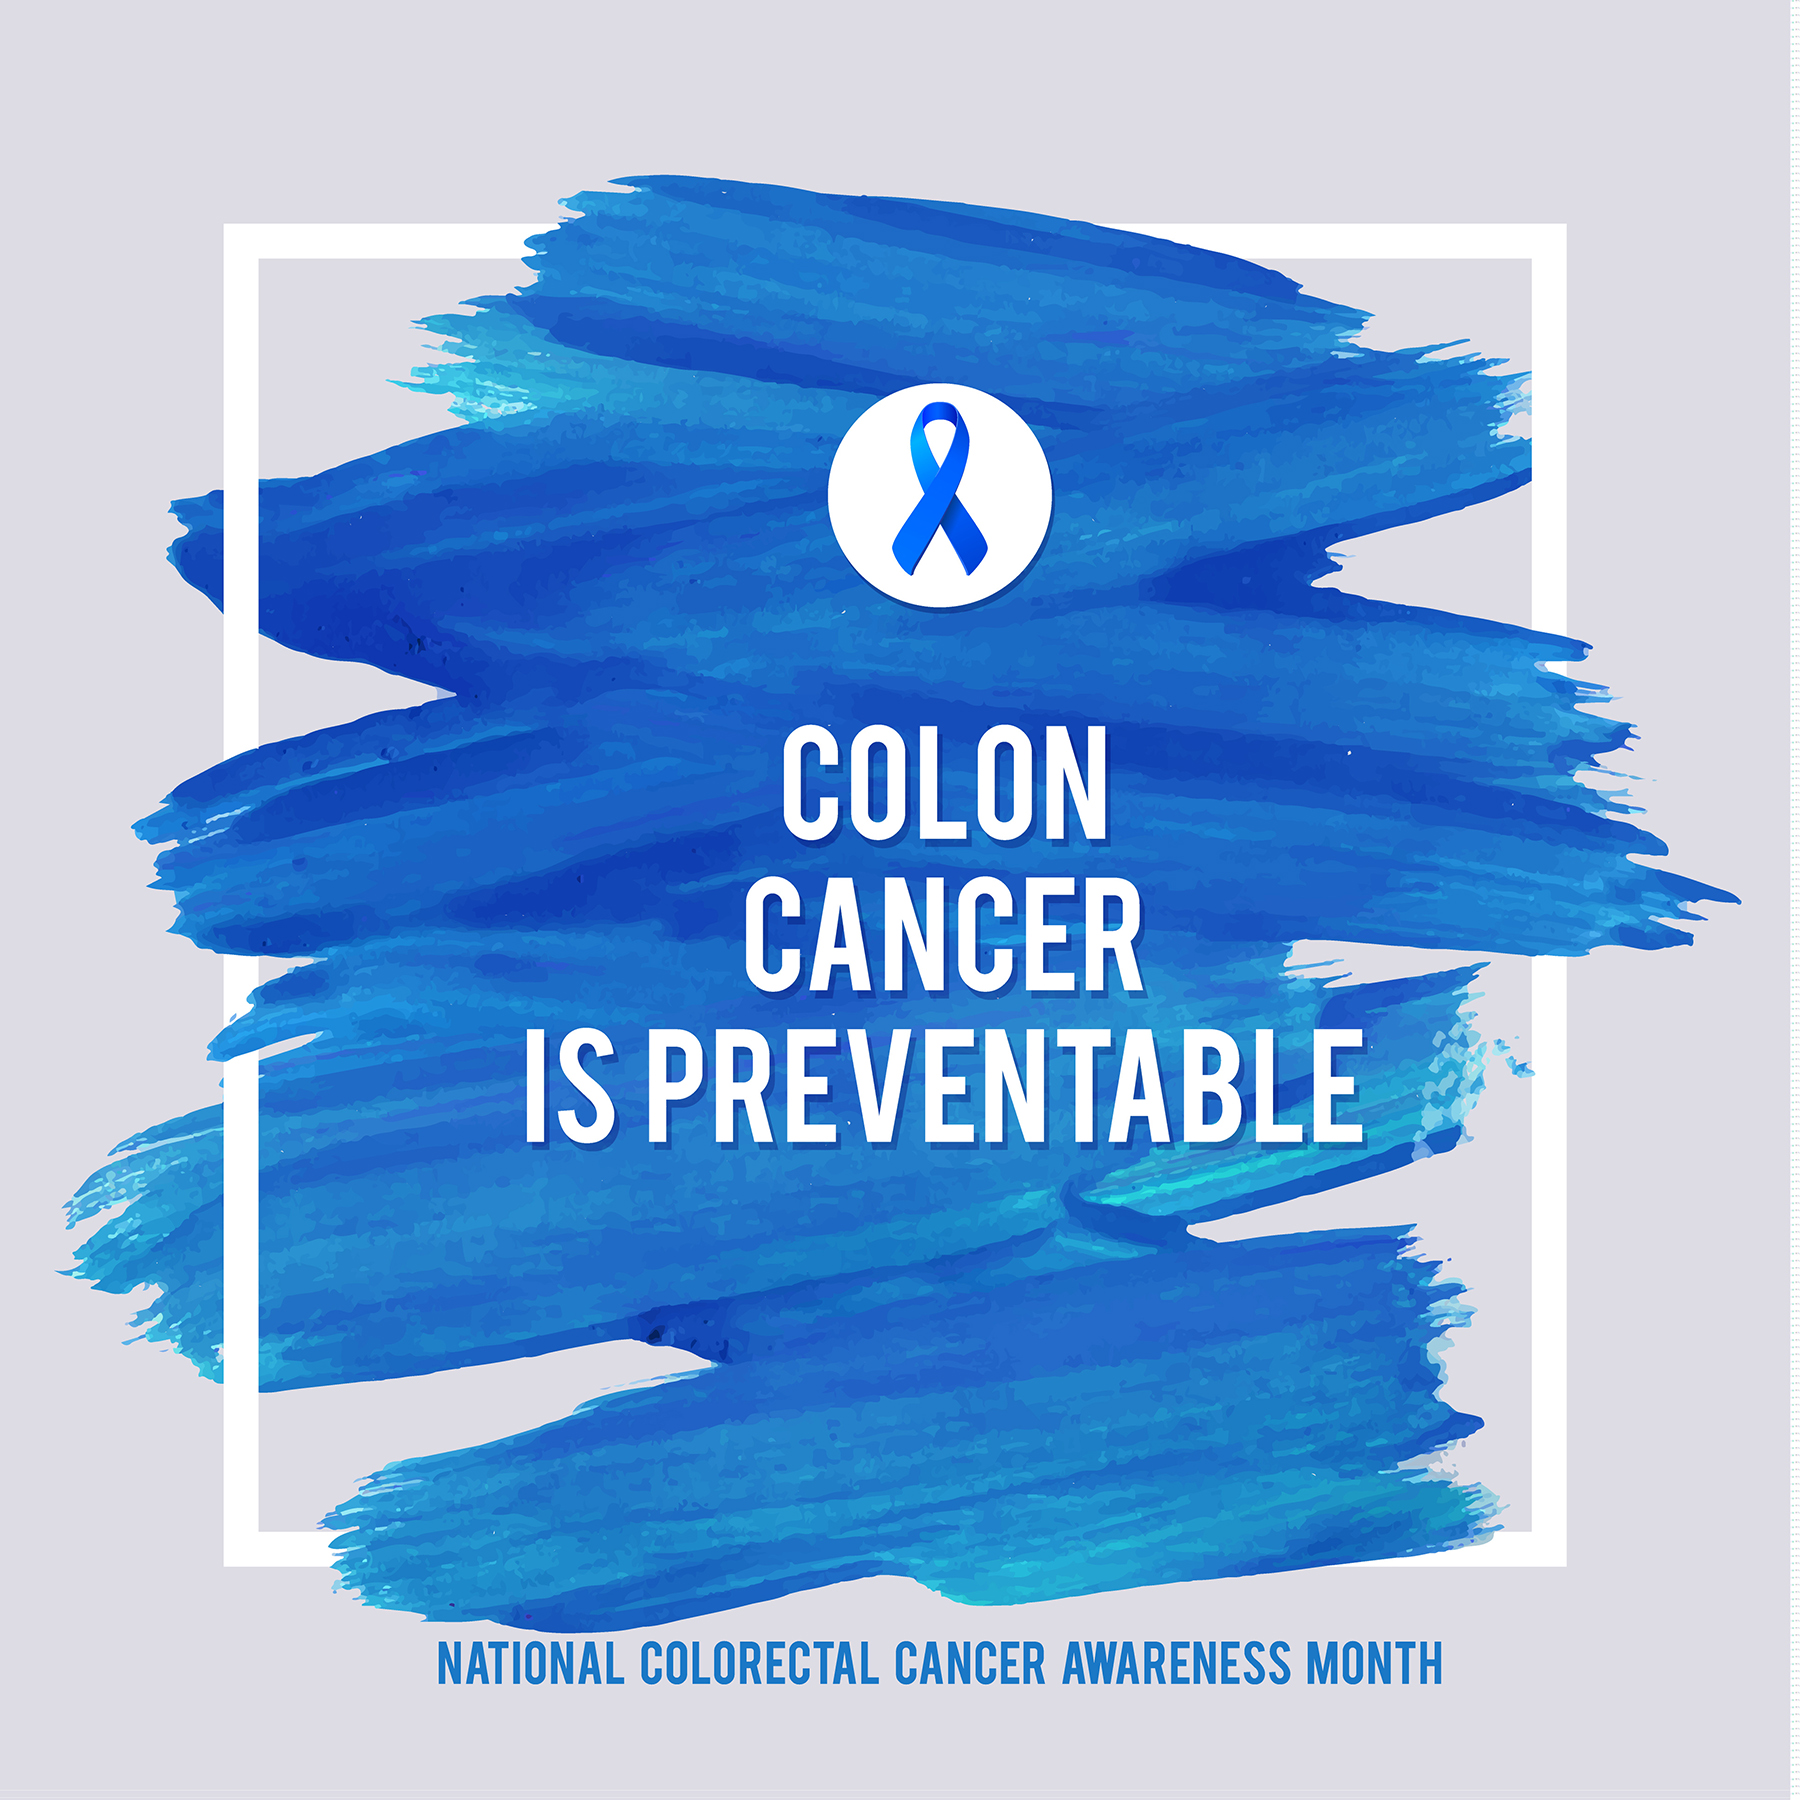 CLORECTAL Cancer Awareness Creative Grey and Blue Poster. Brush Stroke and Silk Ribbon Symbol. National Colon Cancer Awareness Month Banner. Brush Stroke and Text. Medical Square Design.